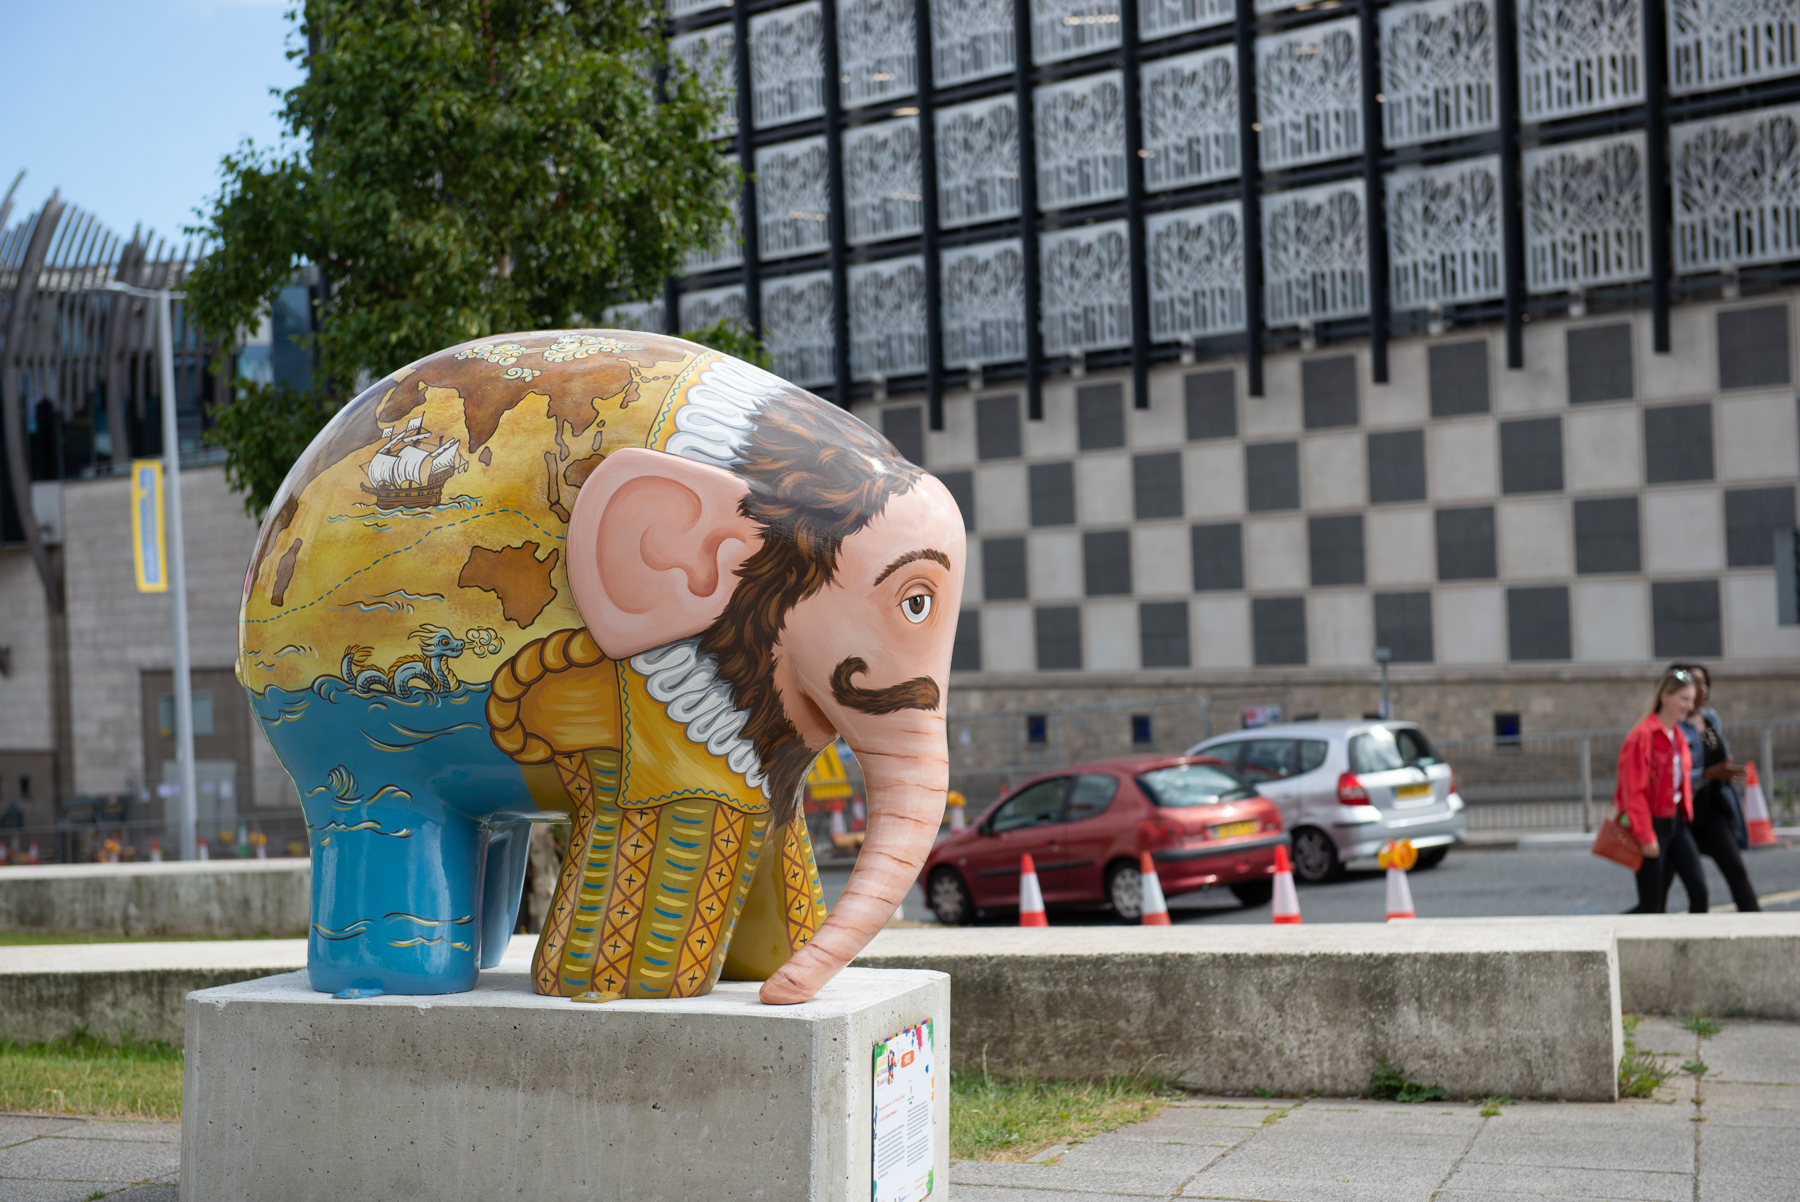 'Francis Drake' by Donna Newman. Sponsored by Willmott Dixon - Image 14 of 17